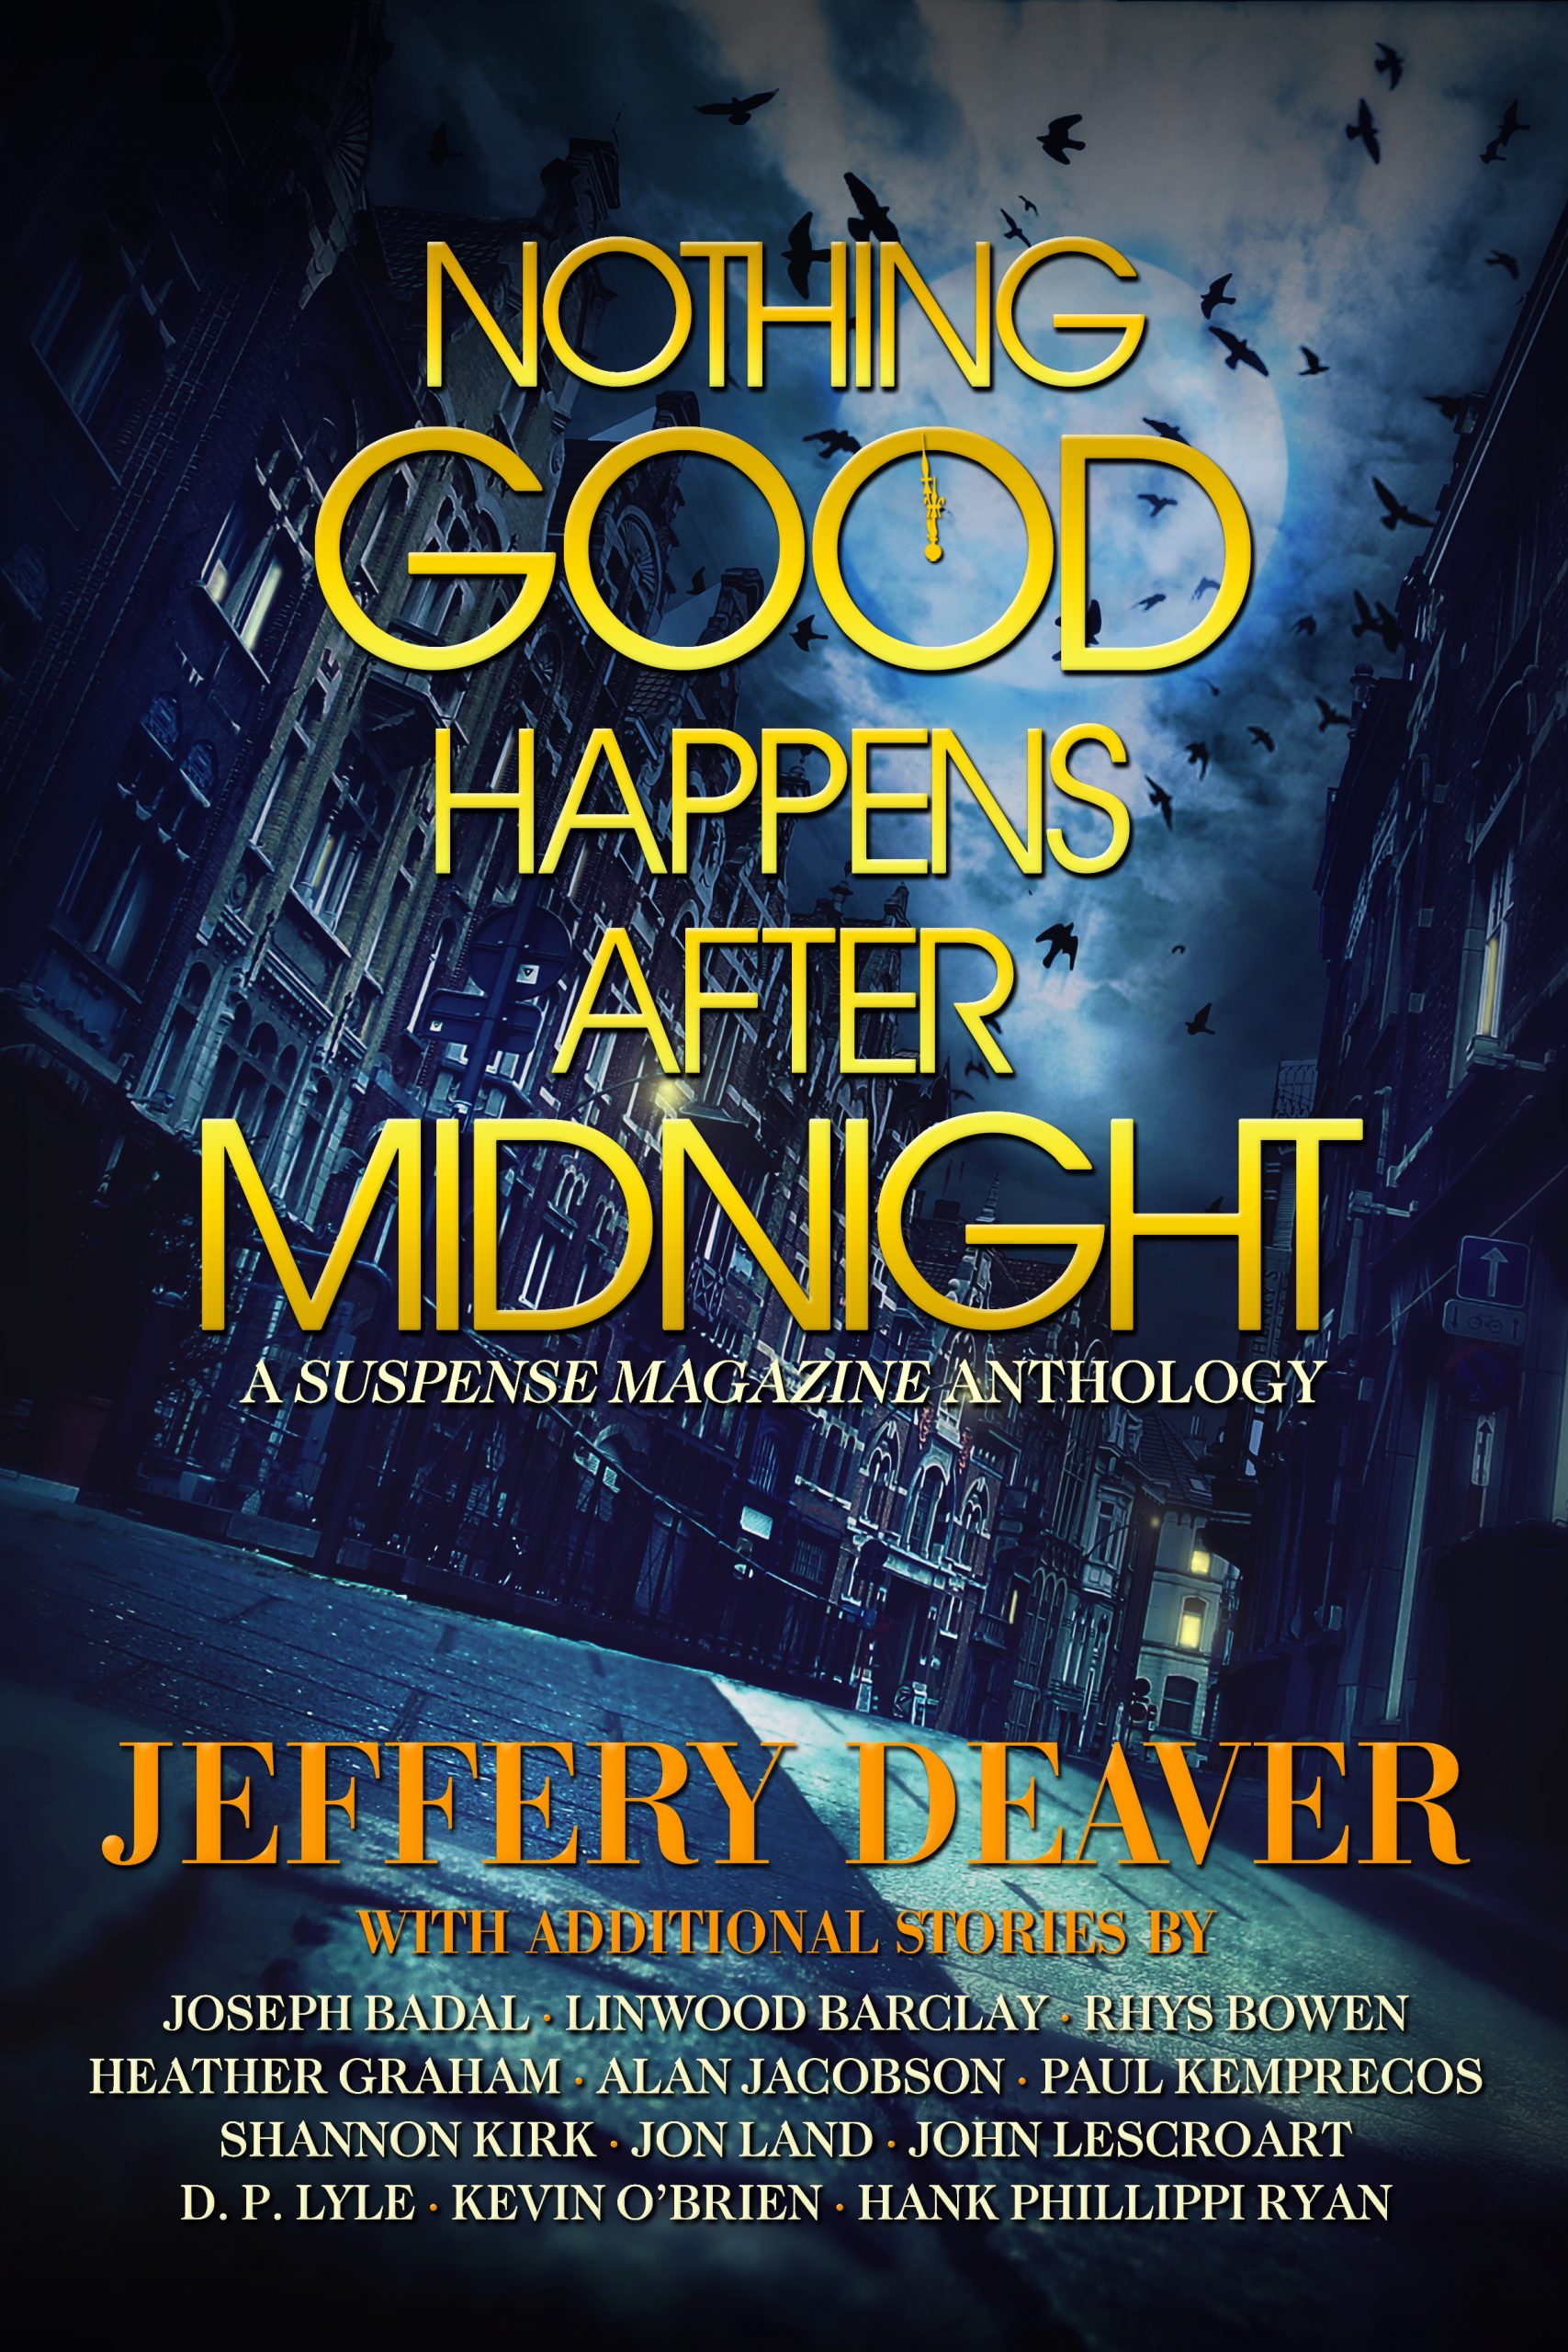 Book jacket for Nothing Good Ever Happens After Midnight